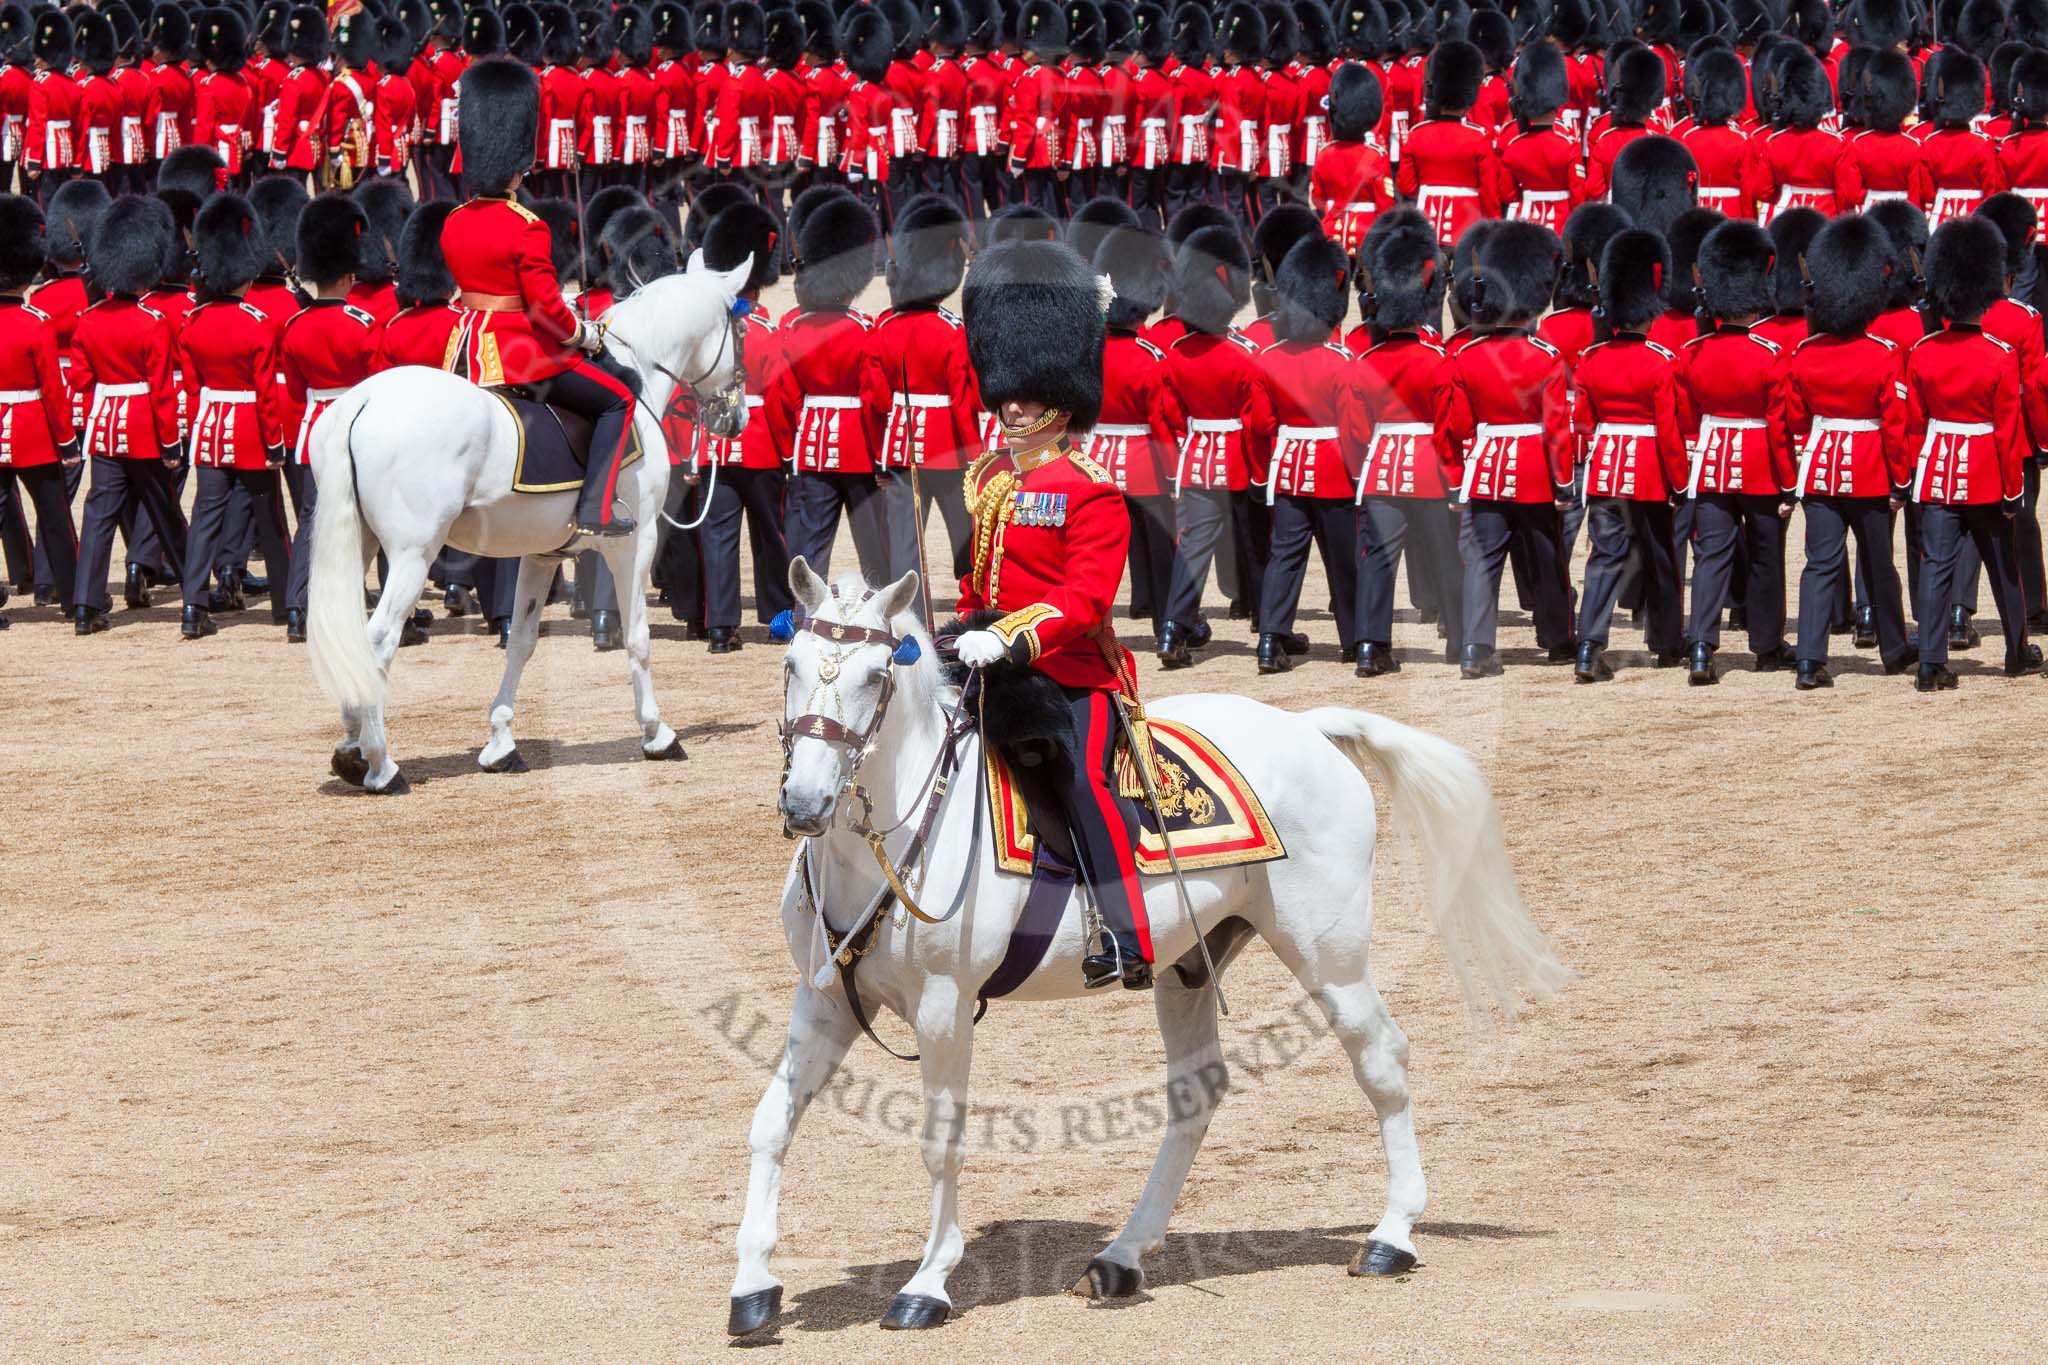 Trooping the Colour 2013: The Field Officer in Brigade Waiting, Lieutenant Colonel Dino Bossi, Welsh Guards, has left the front of the March Past to salute to Her Majesty. Seen behind him, following the guards, is the The Adjutant of the Parade, Captain C J P Davies, Welsh Guards. Image #561, 15 June 2013 11:39 Horse Guards Parade, London, UK